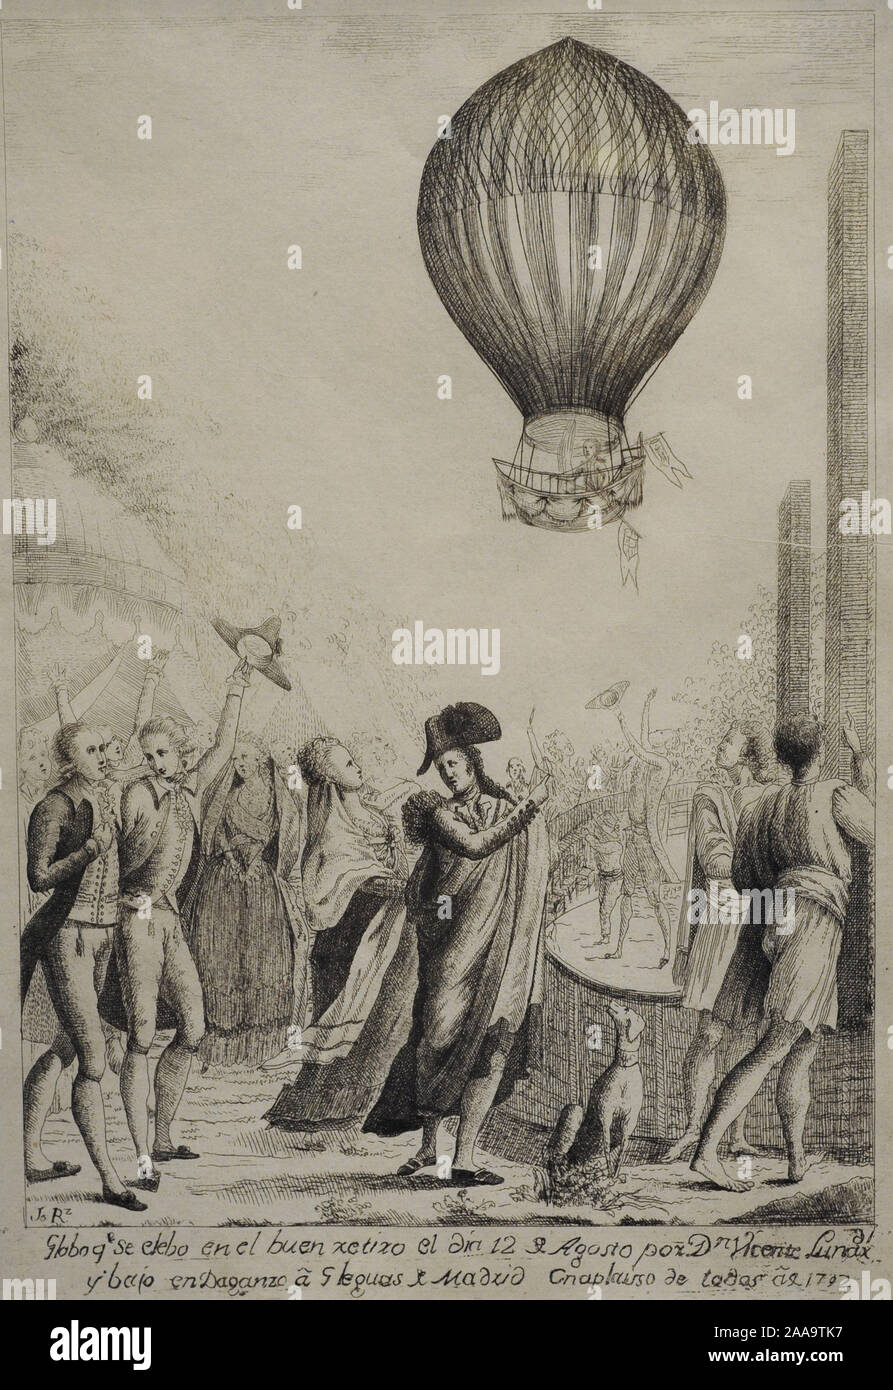 Balloon ascent of Vicente Lunardi (1754-1806) on the Buen Retiro, August 12, 1792. Etching on paper, ca.1793. History Museum. Madrid. Spain. Stock Photo